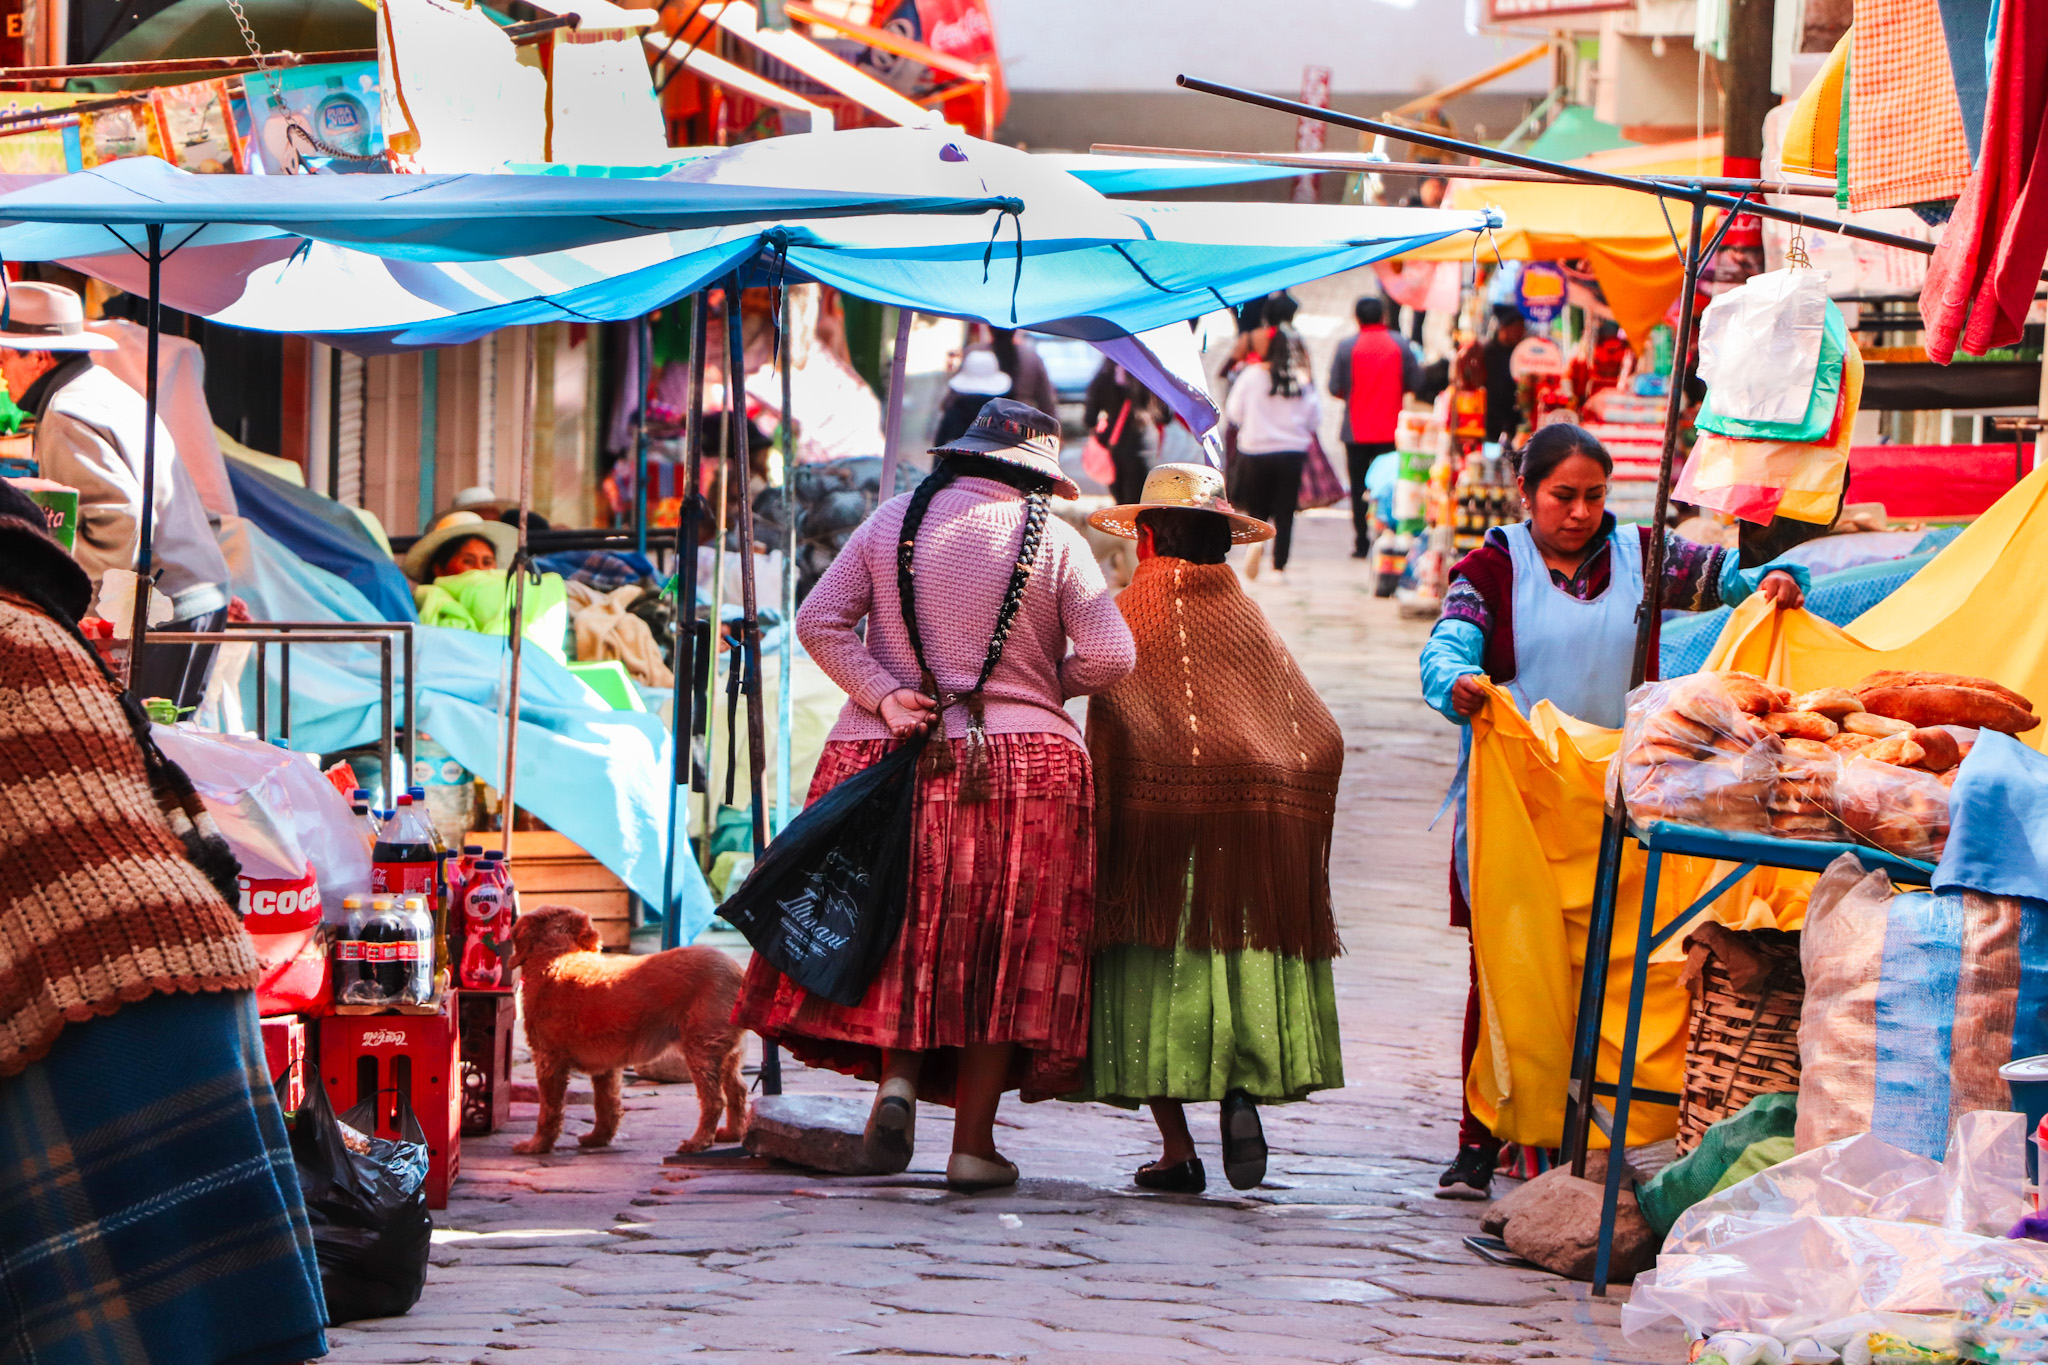 Best Things to Do in Copacabana - Cholitas at a local market in Copacabana, Bolivia